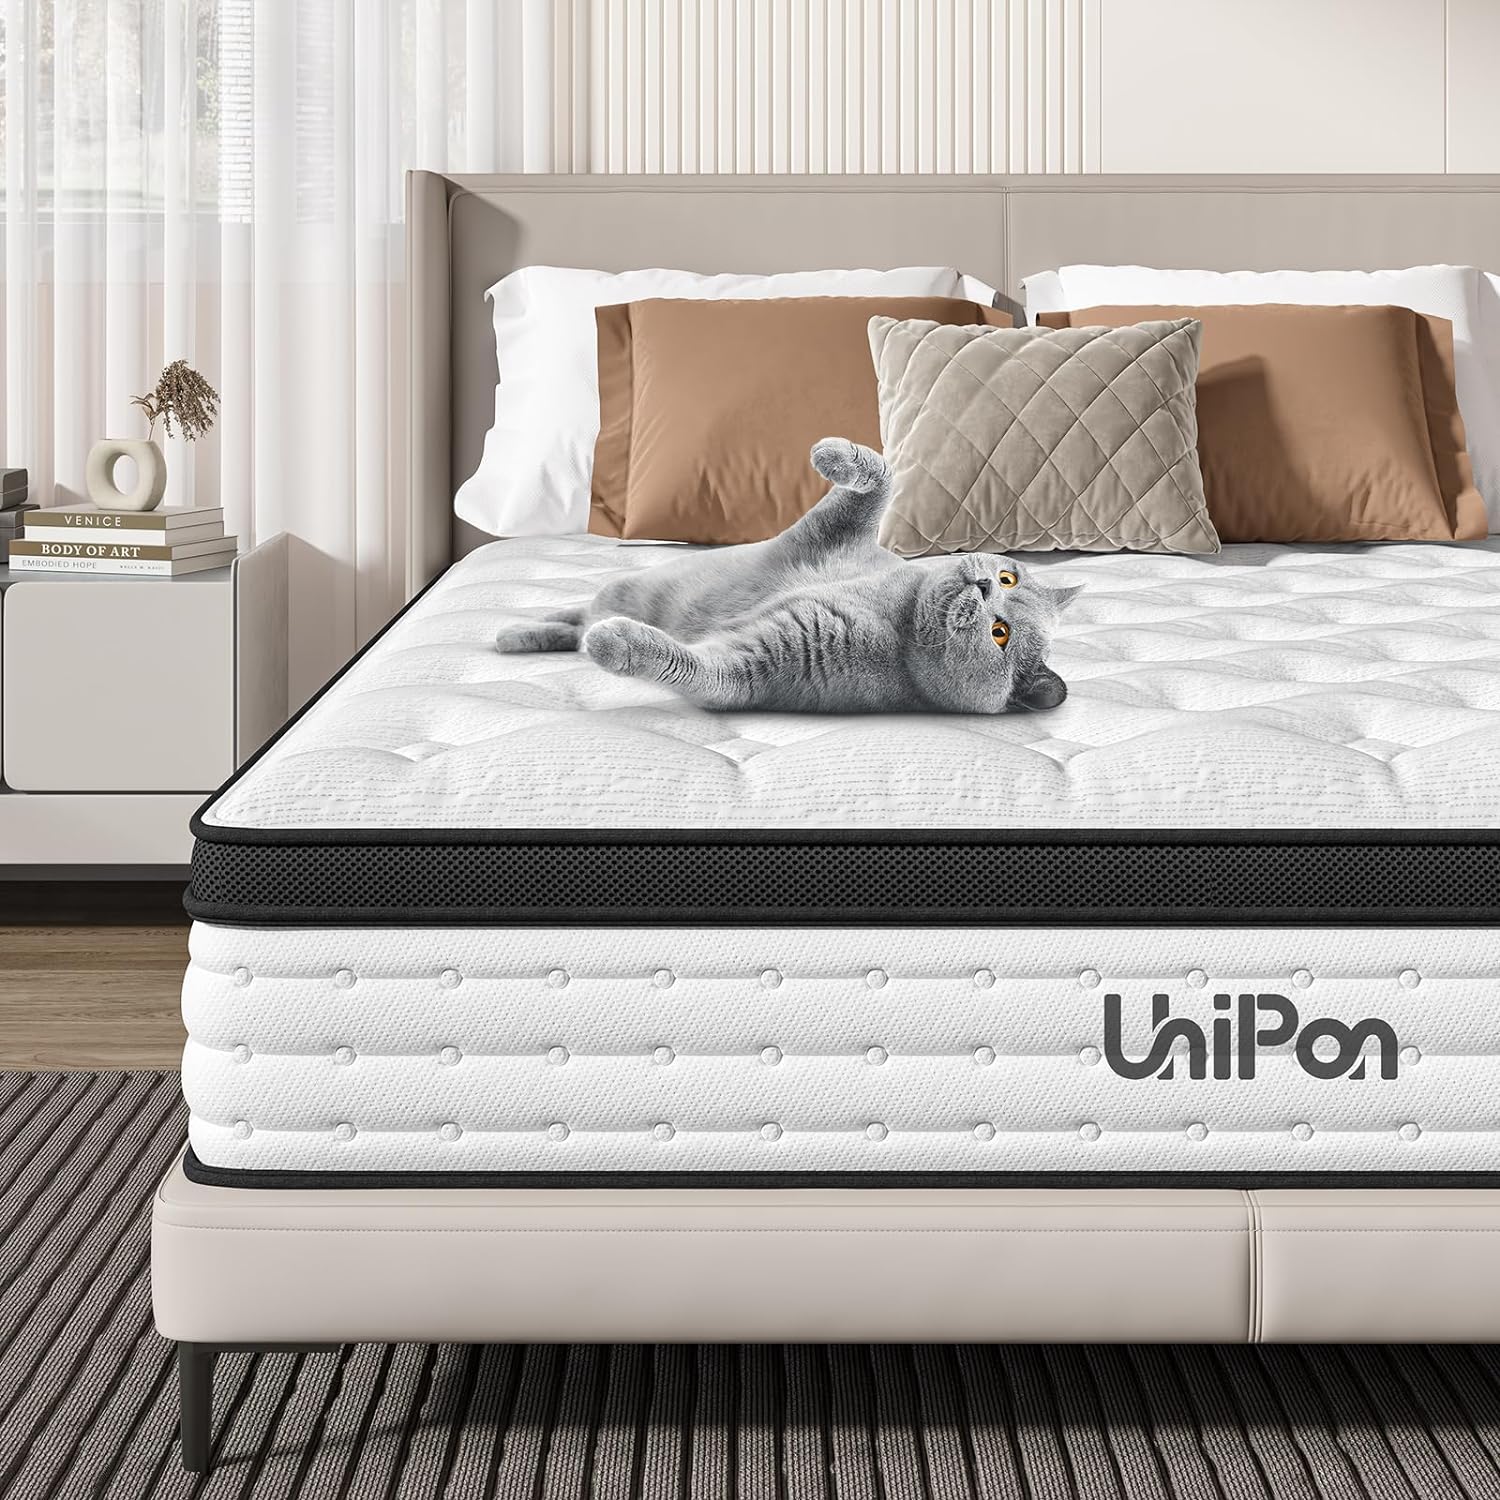 UniPon 10 Inch Hybrid Mattress Full, Spring Mattress with Gel Memory Foam, Medium Firm Mattress, Made in USA, Supportive Individually Pocket Spring Mattress, Bed in a Box, Pressure Relief